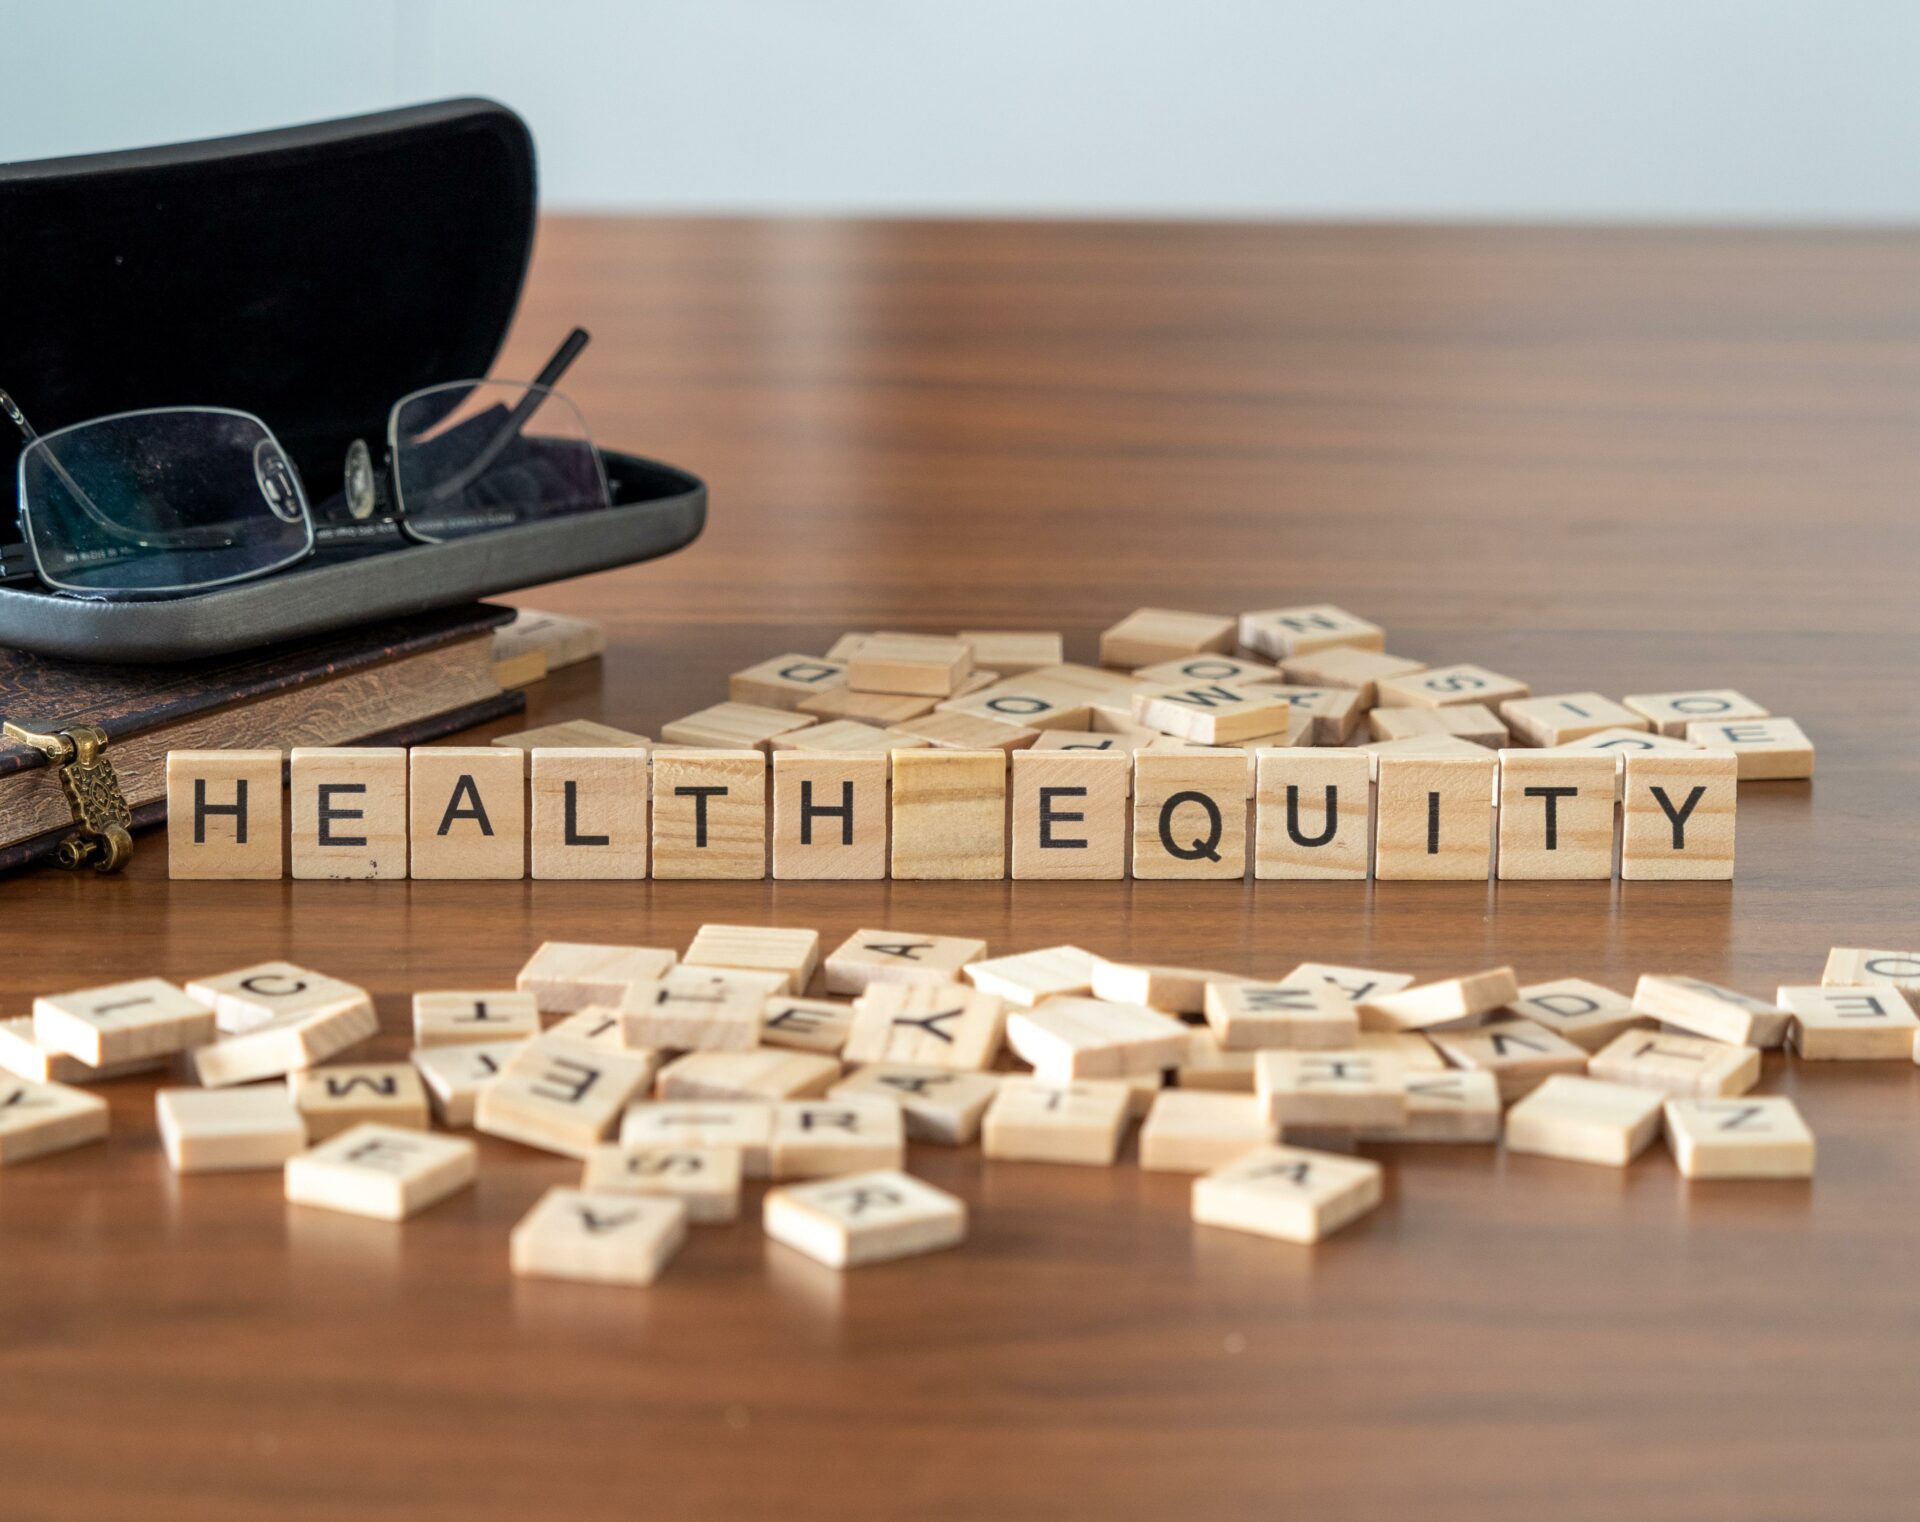 Until tackling health inequalities becomes business as usual, innovation is our best chance of equity